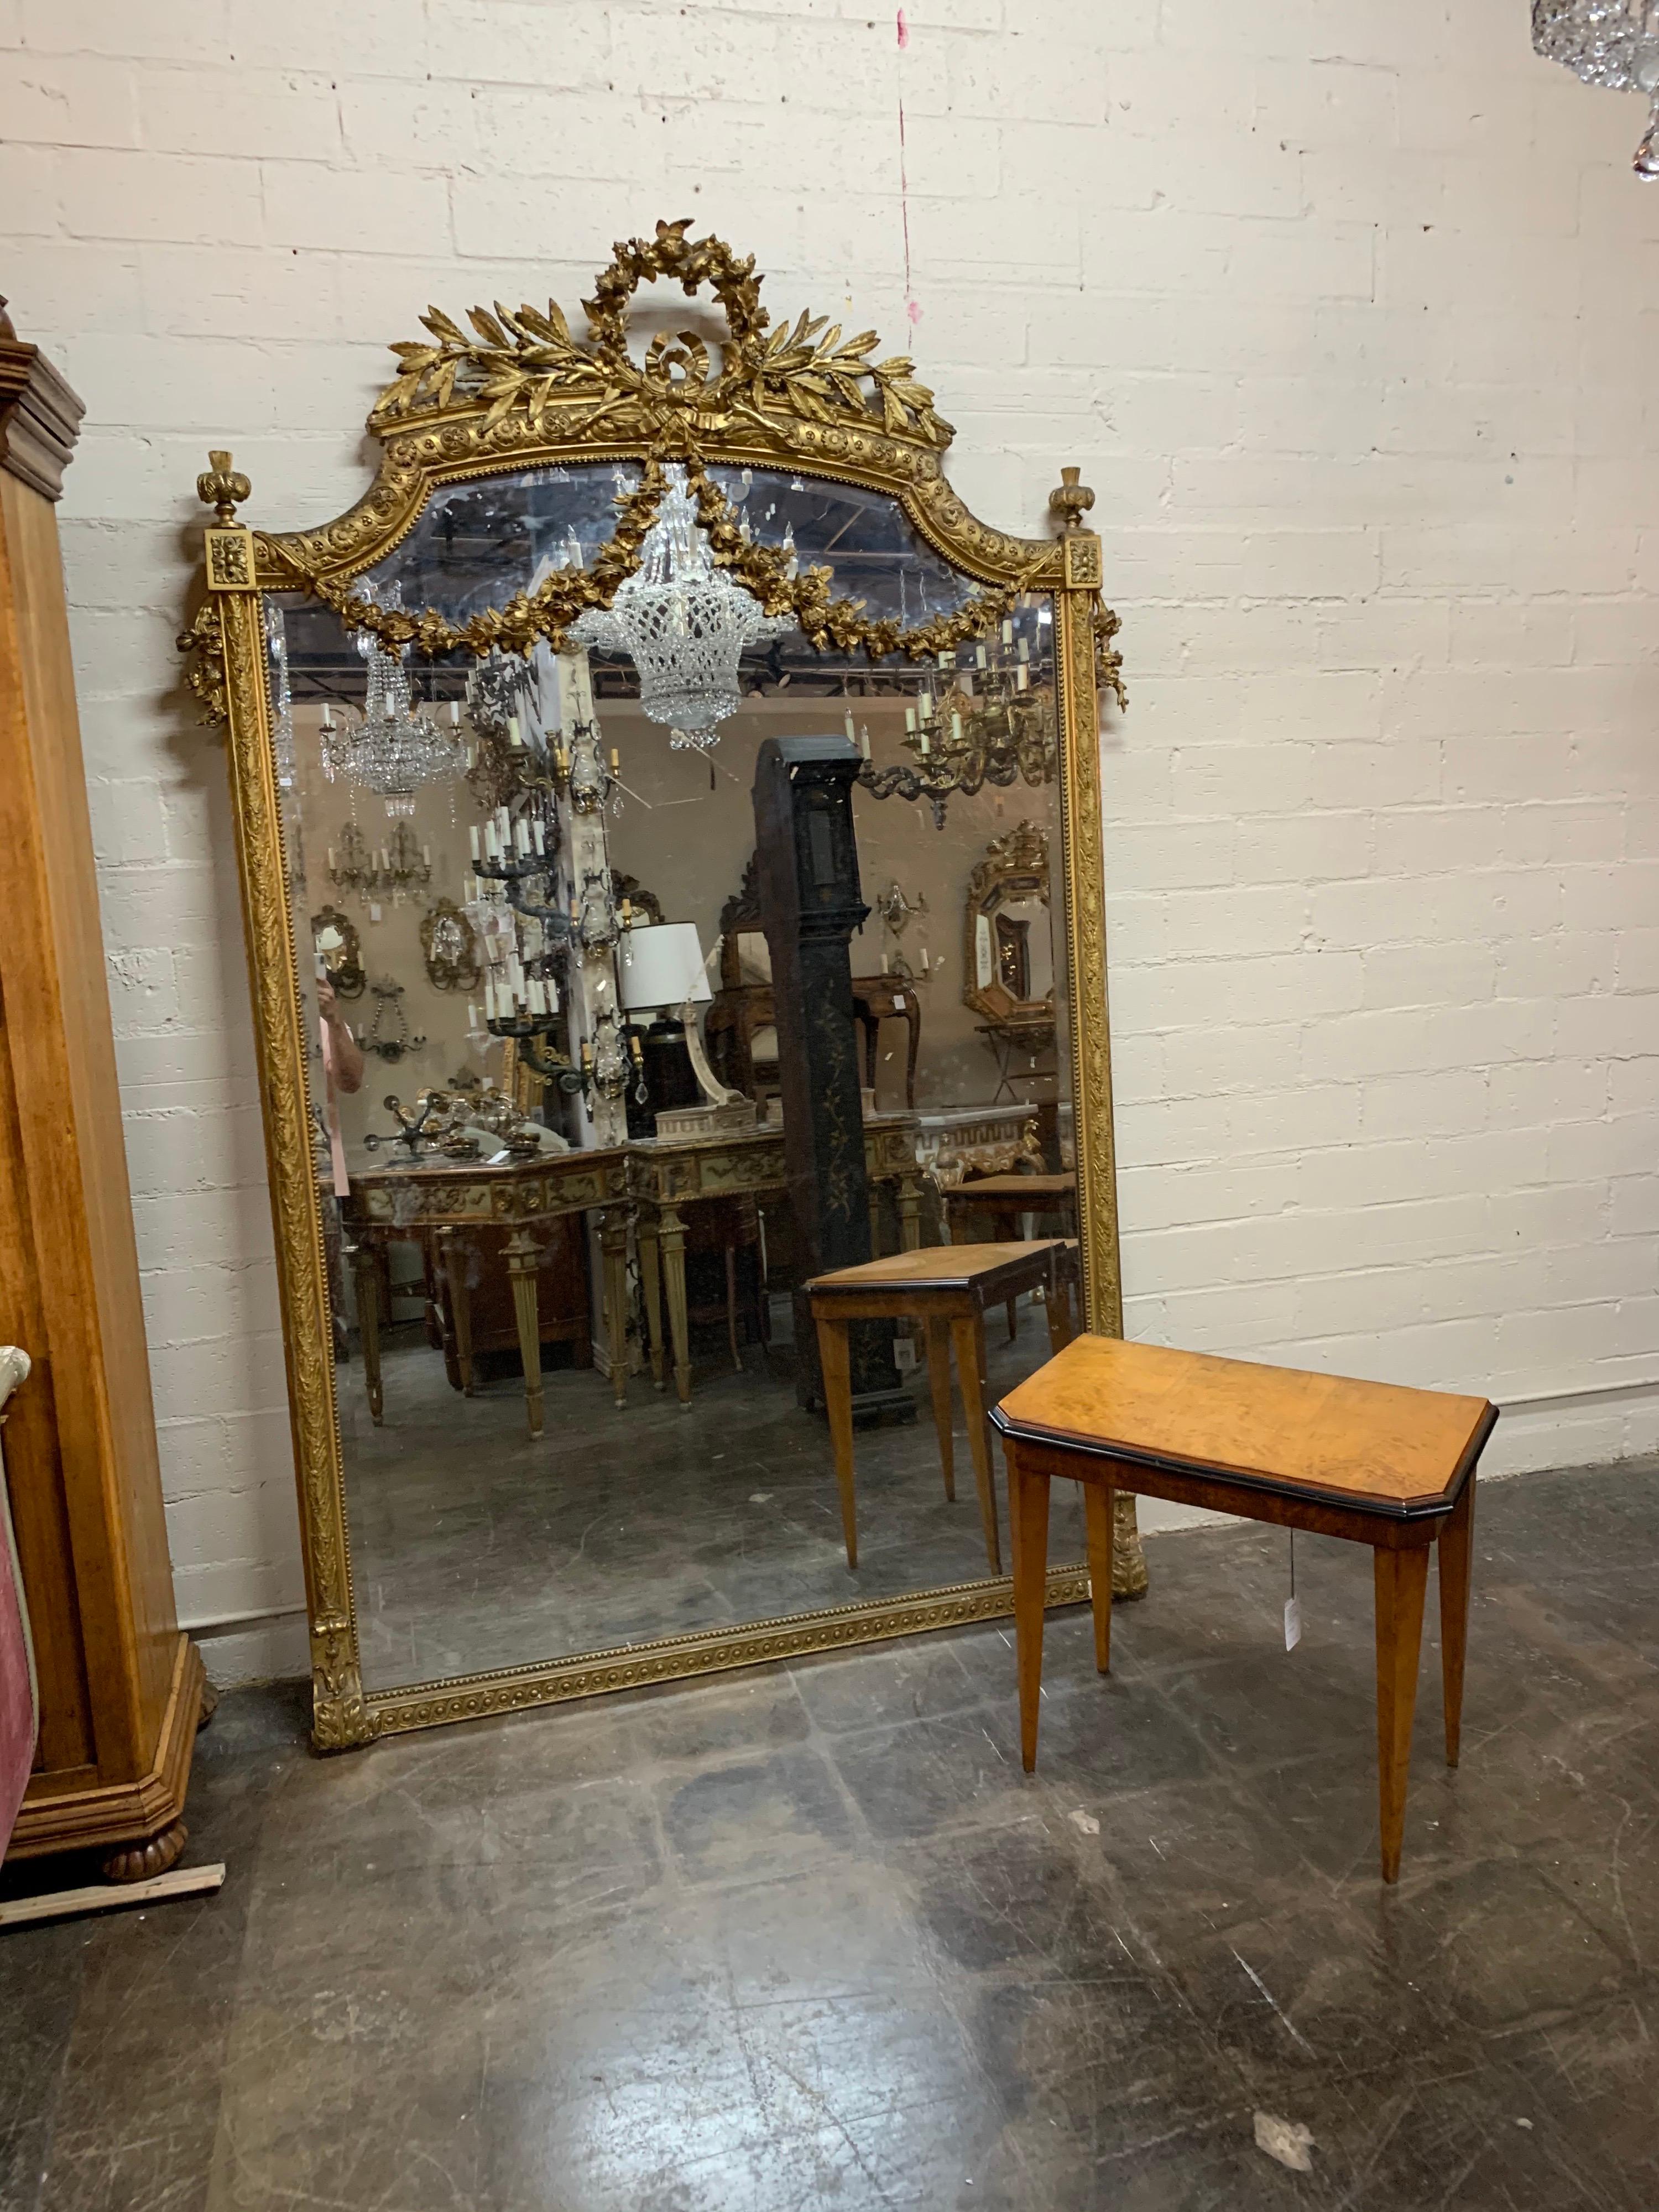 Exquisite 19th century palace size carved and giltwood Louis XVI style mirror. Featuring beautifully carved floral images and urn like shapes on the top corners. The outside border of the mirror also has amazing decorative carving along with a